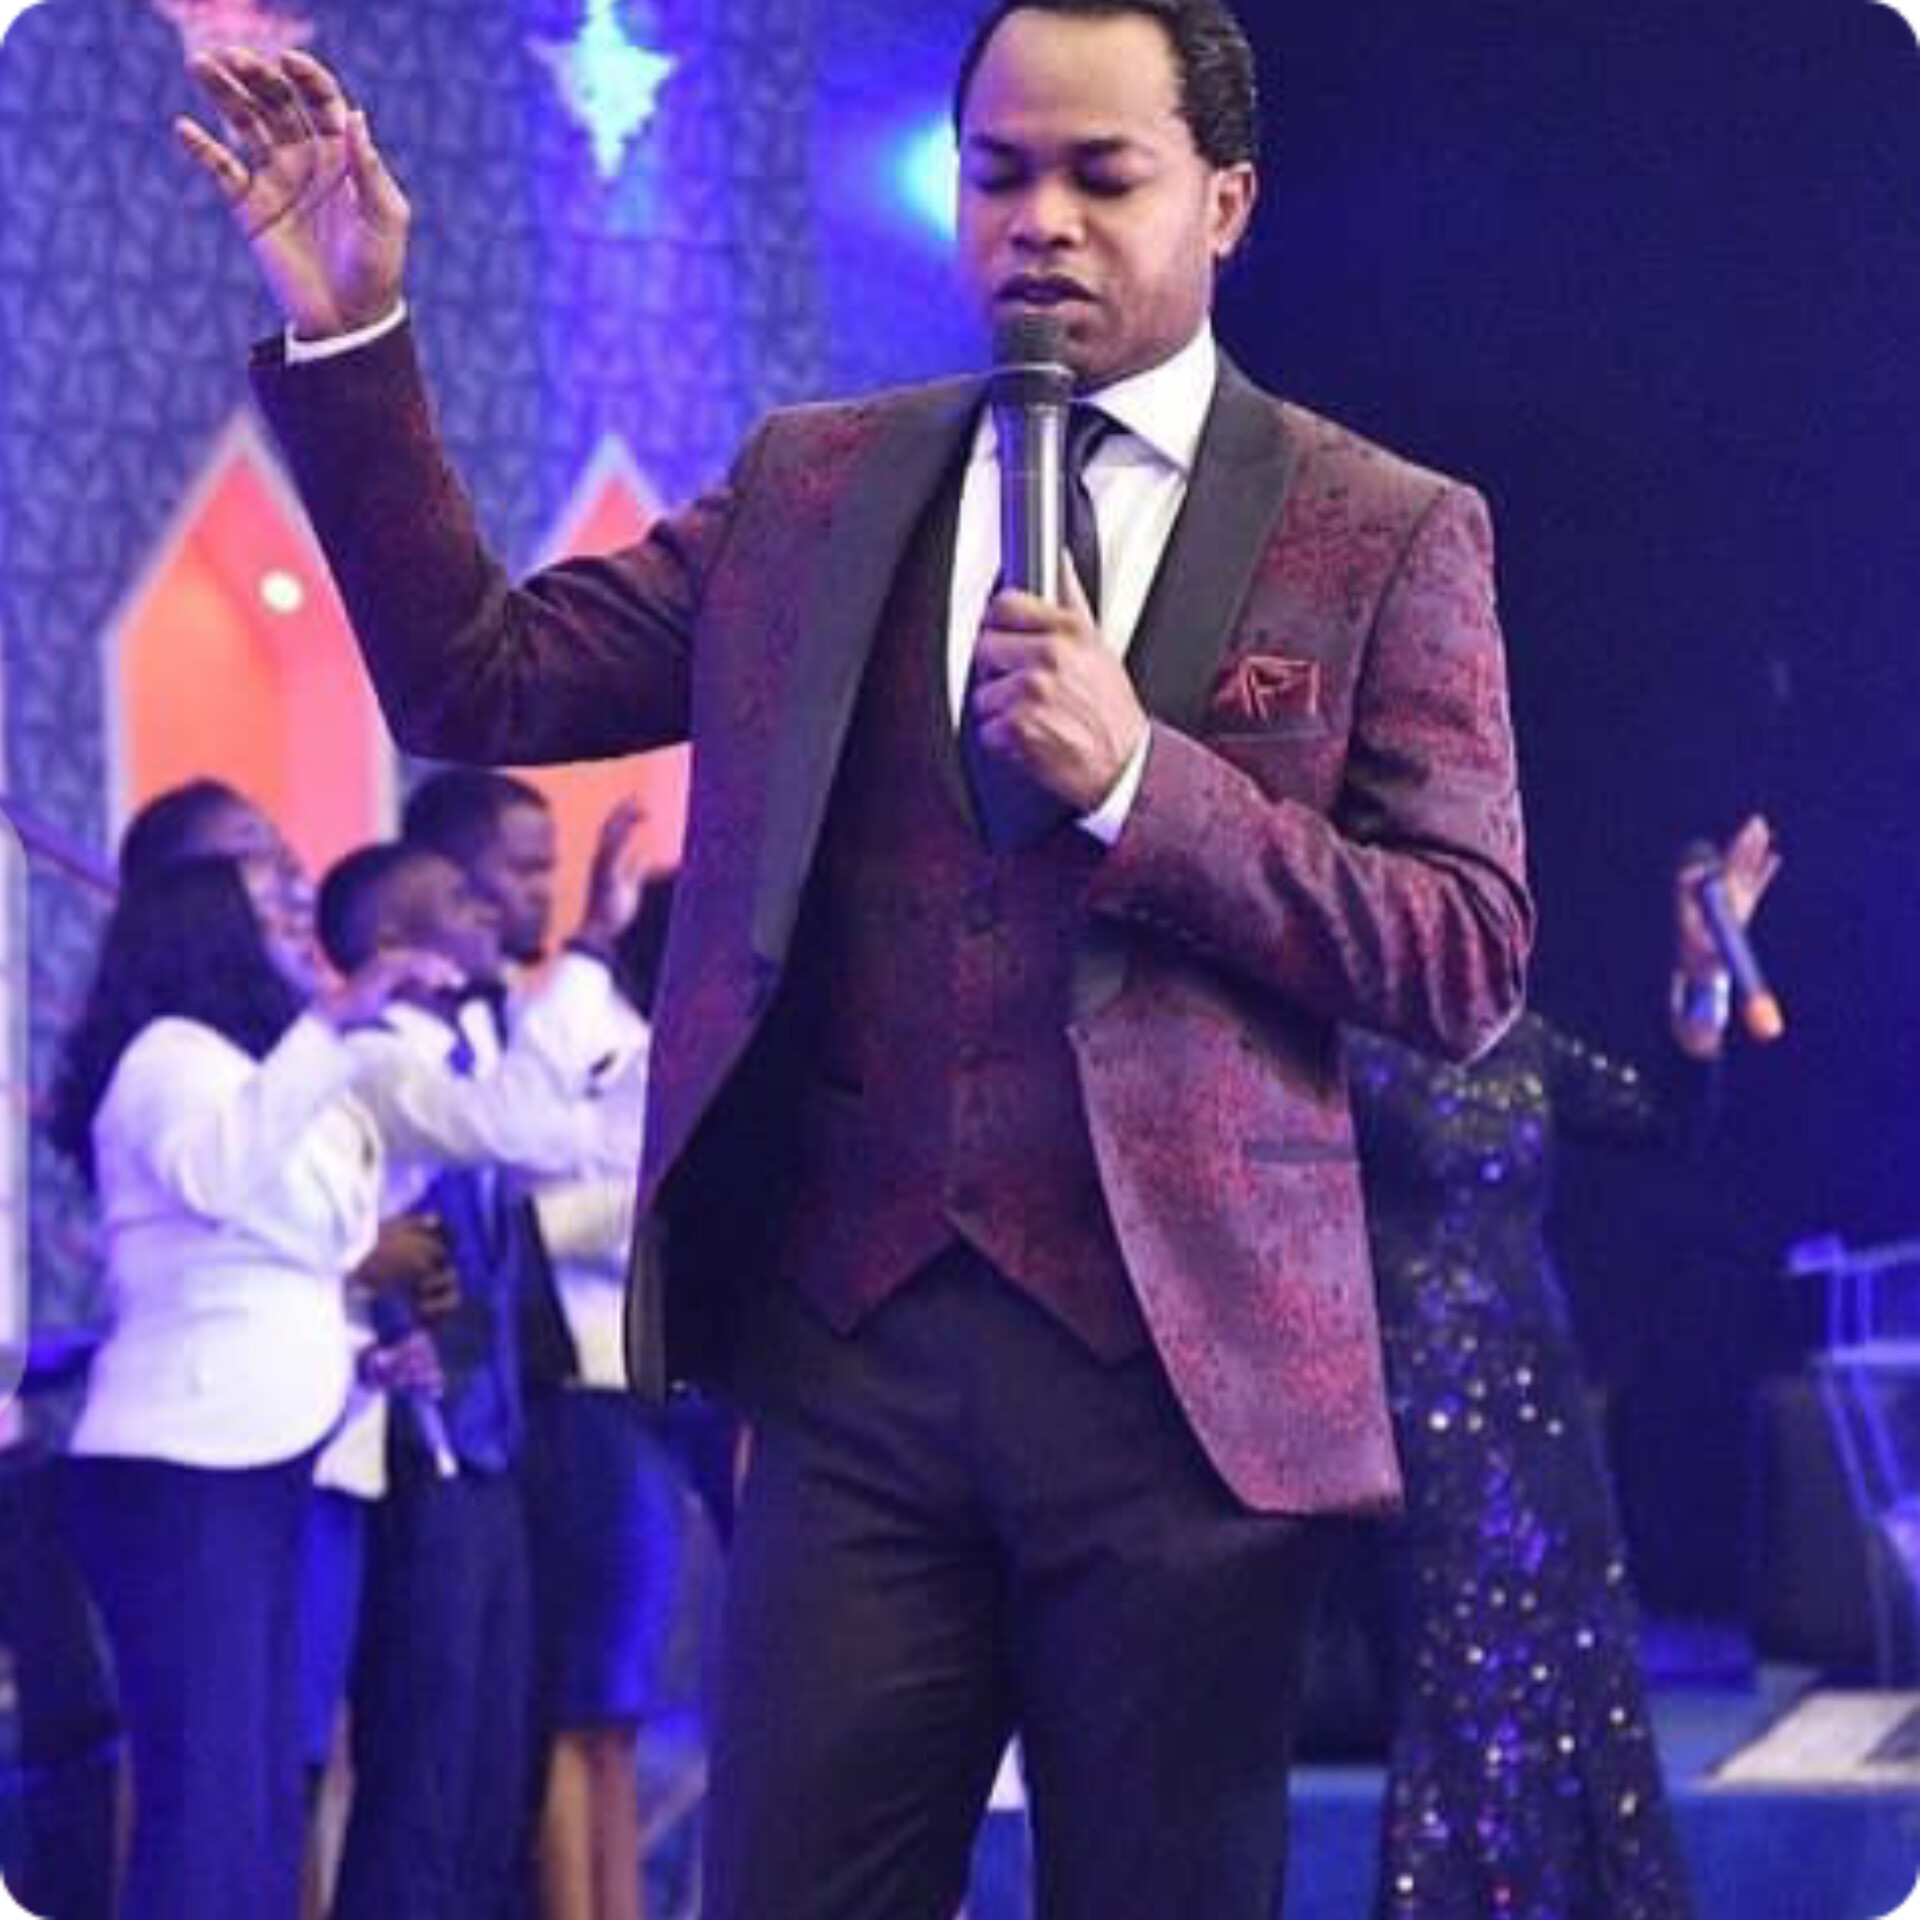 I Was Sh∆t With A Guπ From Close Range, It Didn't Penetrate Me – Pastor Isaiah Mac Wealth (VIDEO)